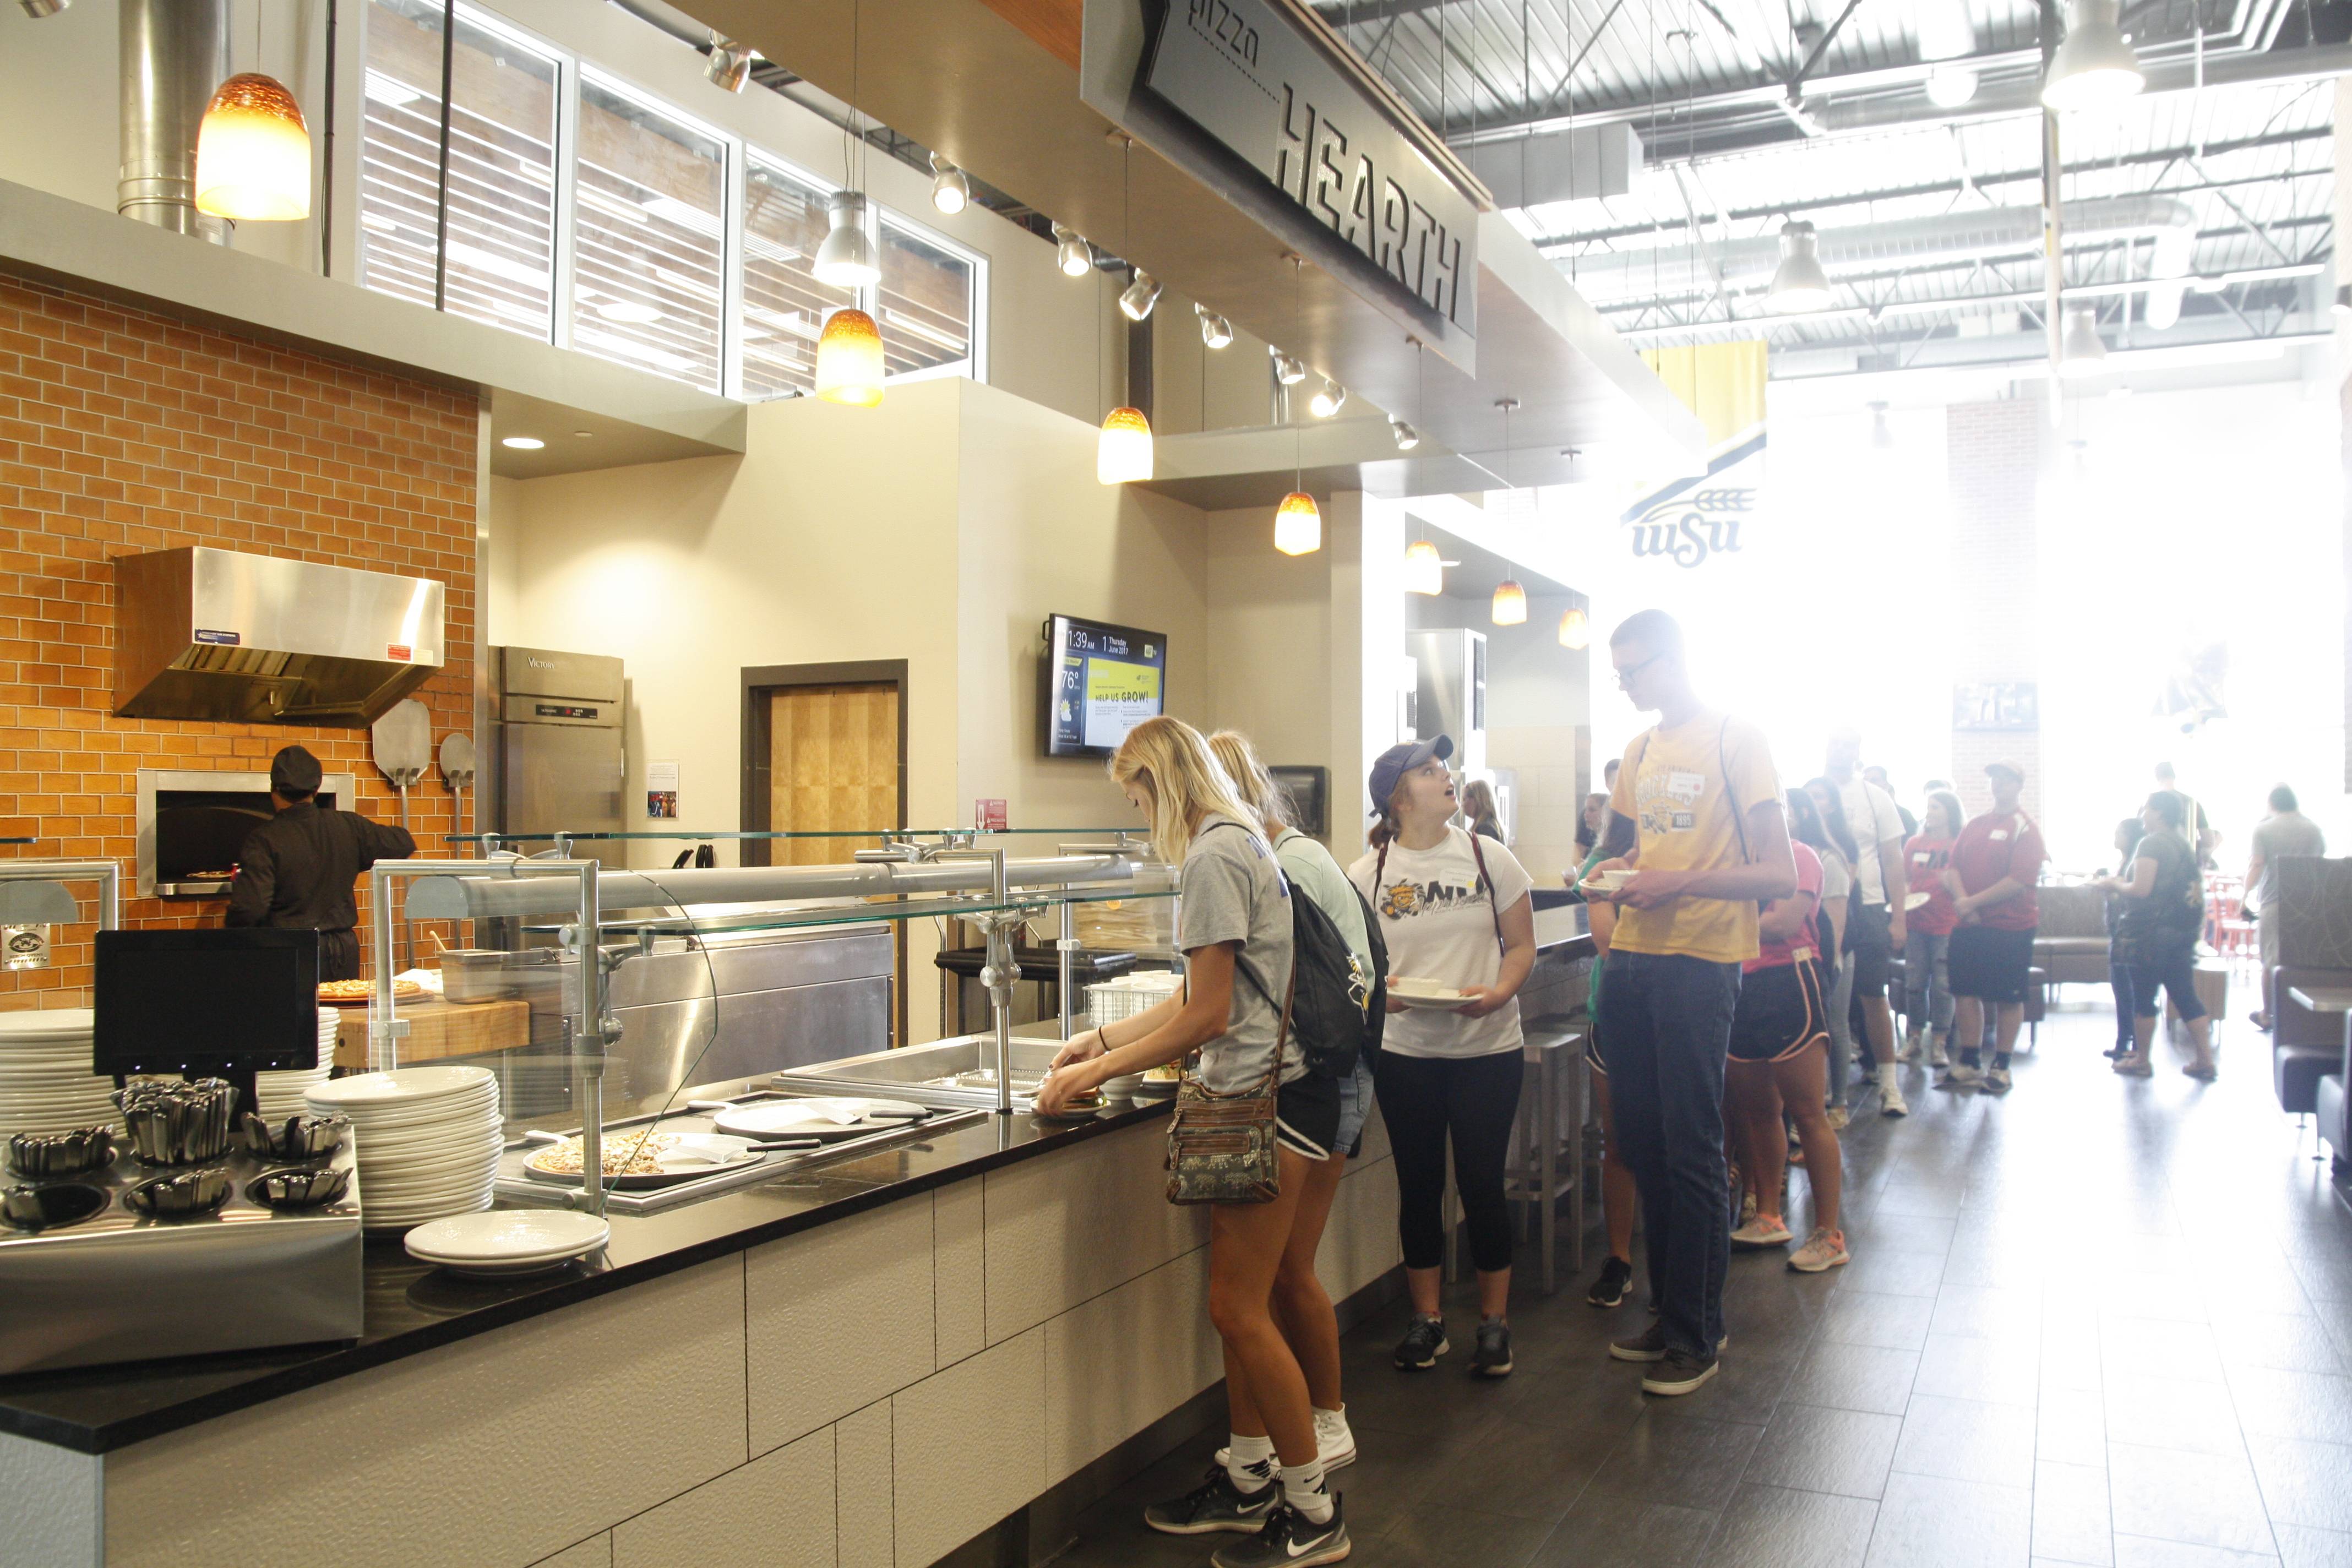 Students eating in Dining hall